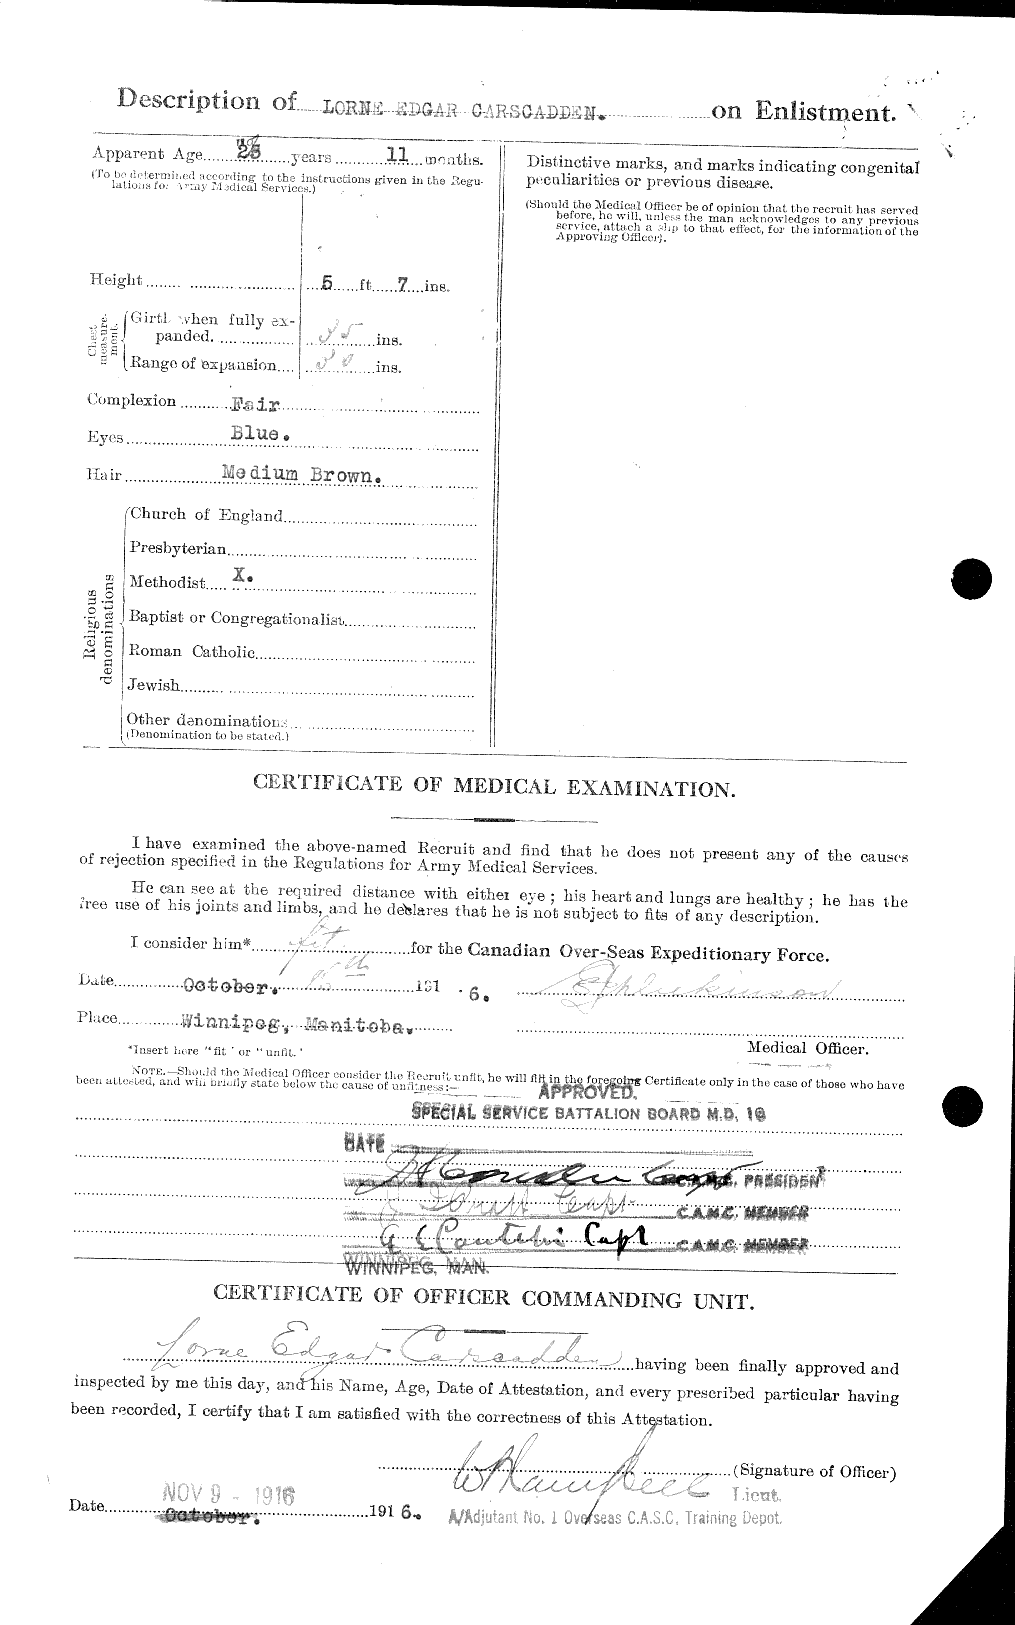 Personnel Records of the First World War - CEF 011480b